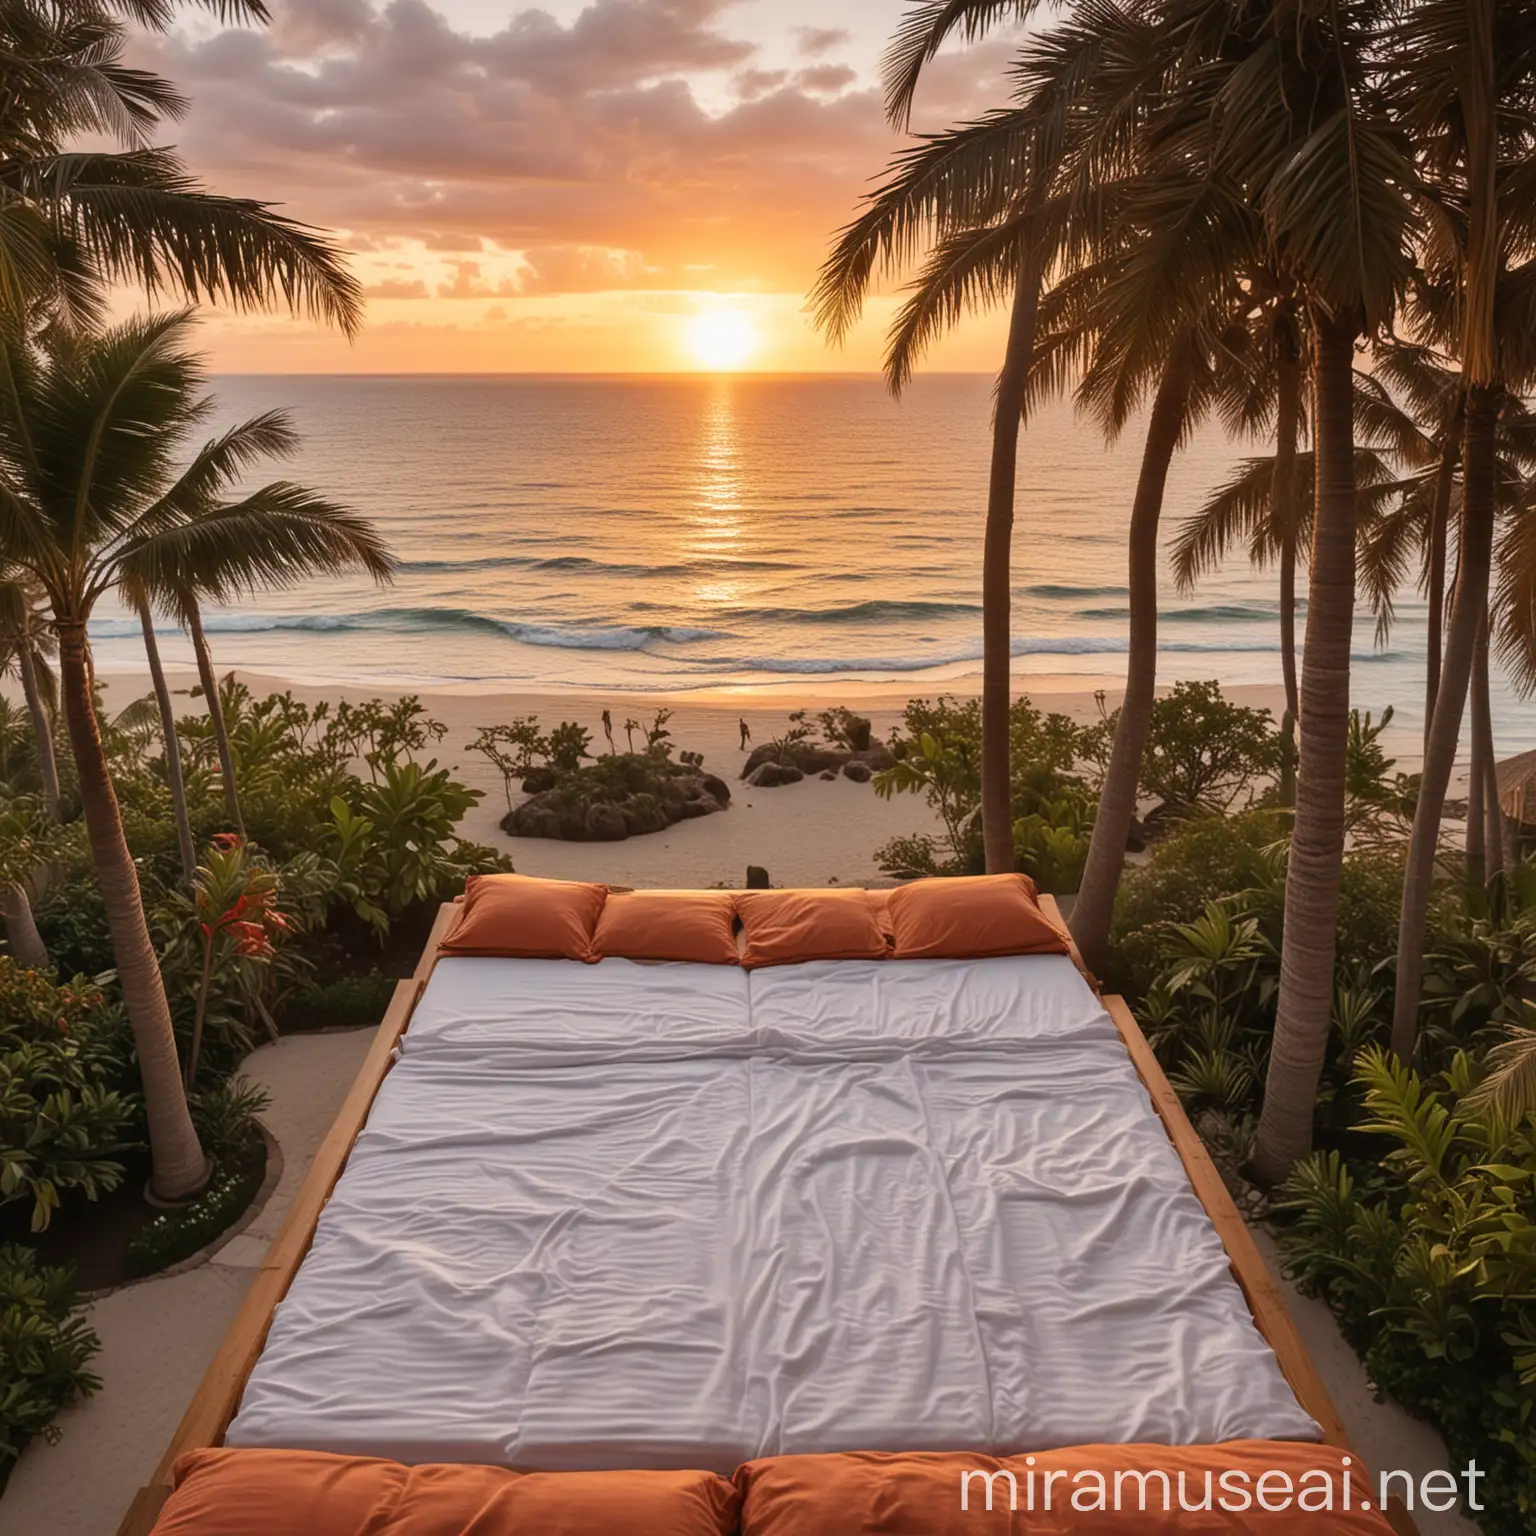 Tropical Hotel Bed Overlooking Sunset Ocean View with Palm Trees